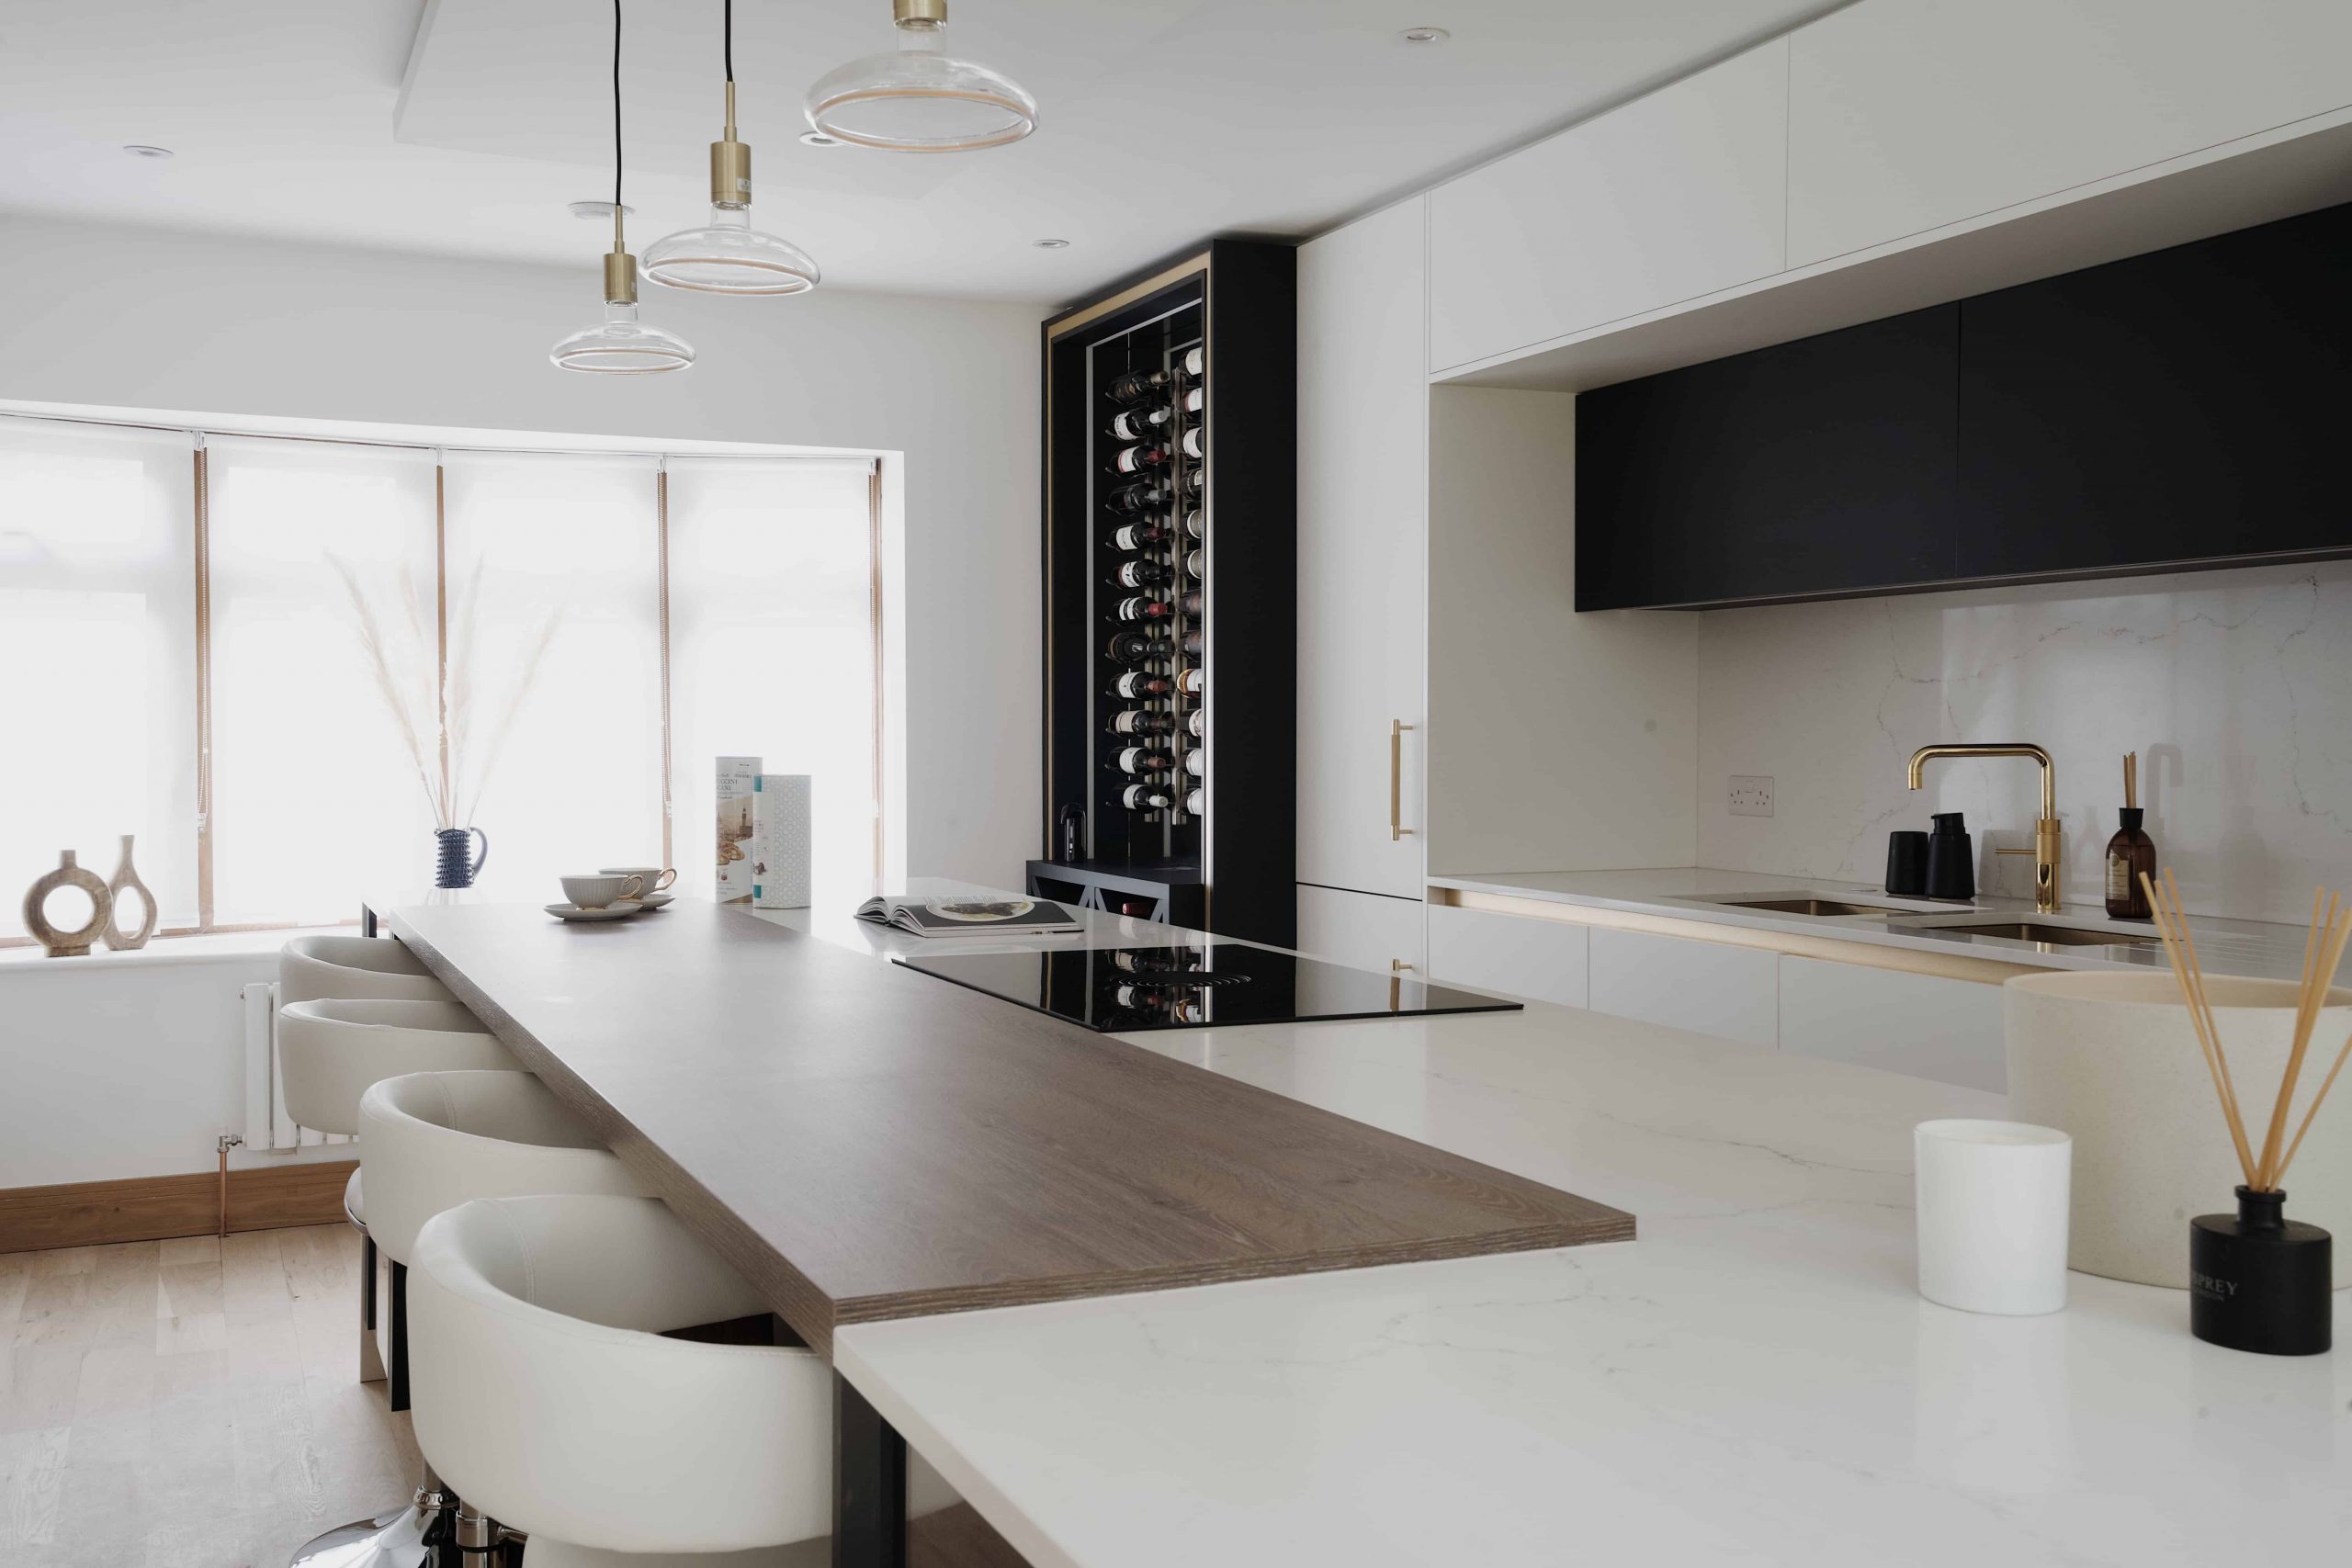 A bespoke kitchen in London featuring a wooden island and stylish black and white design.